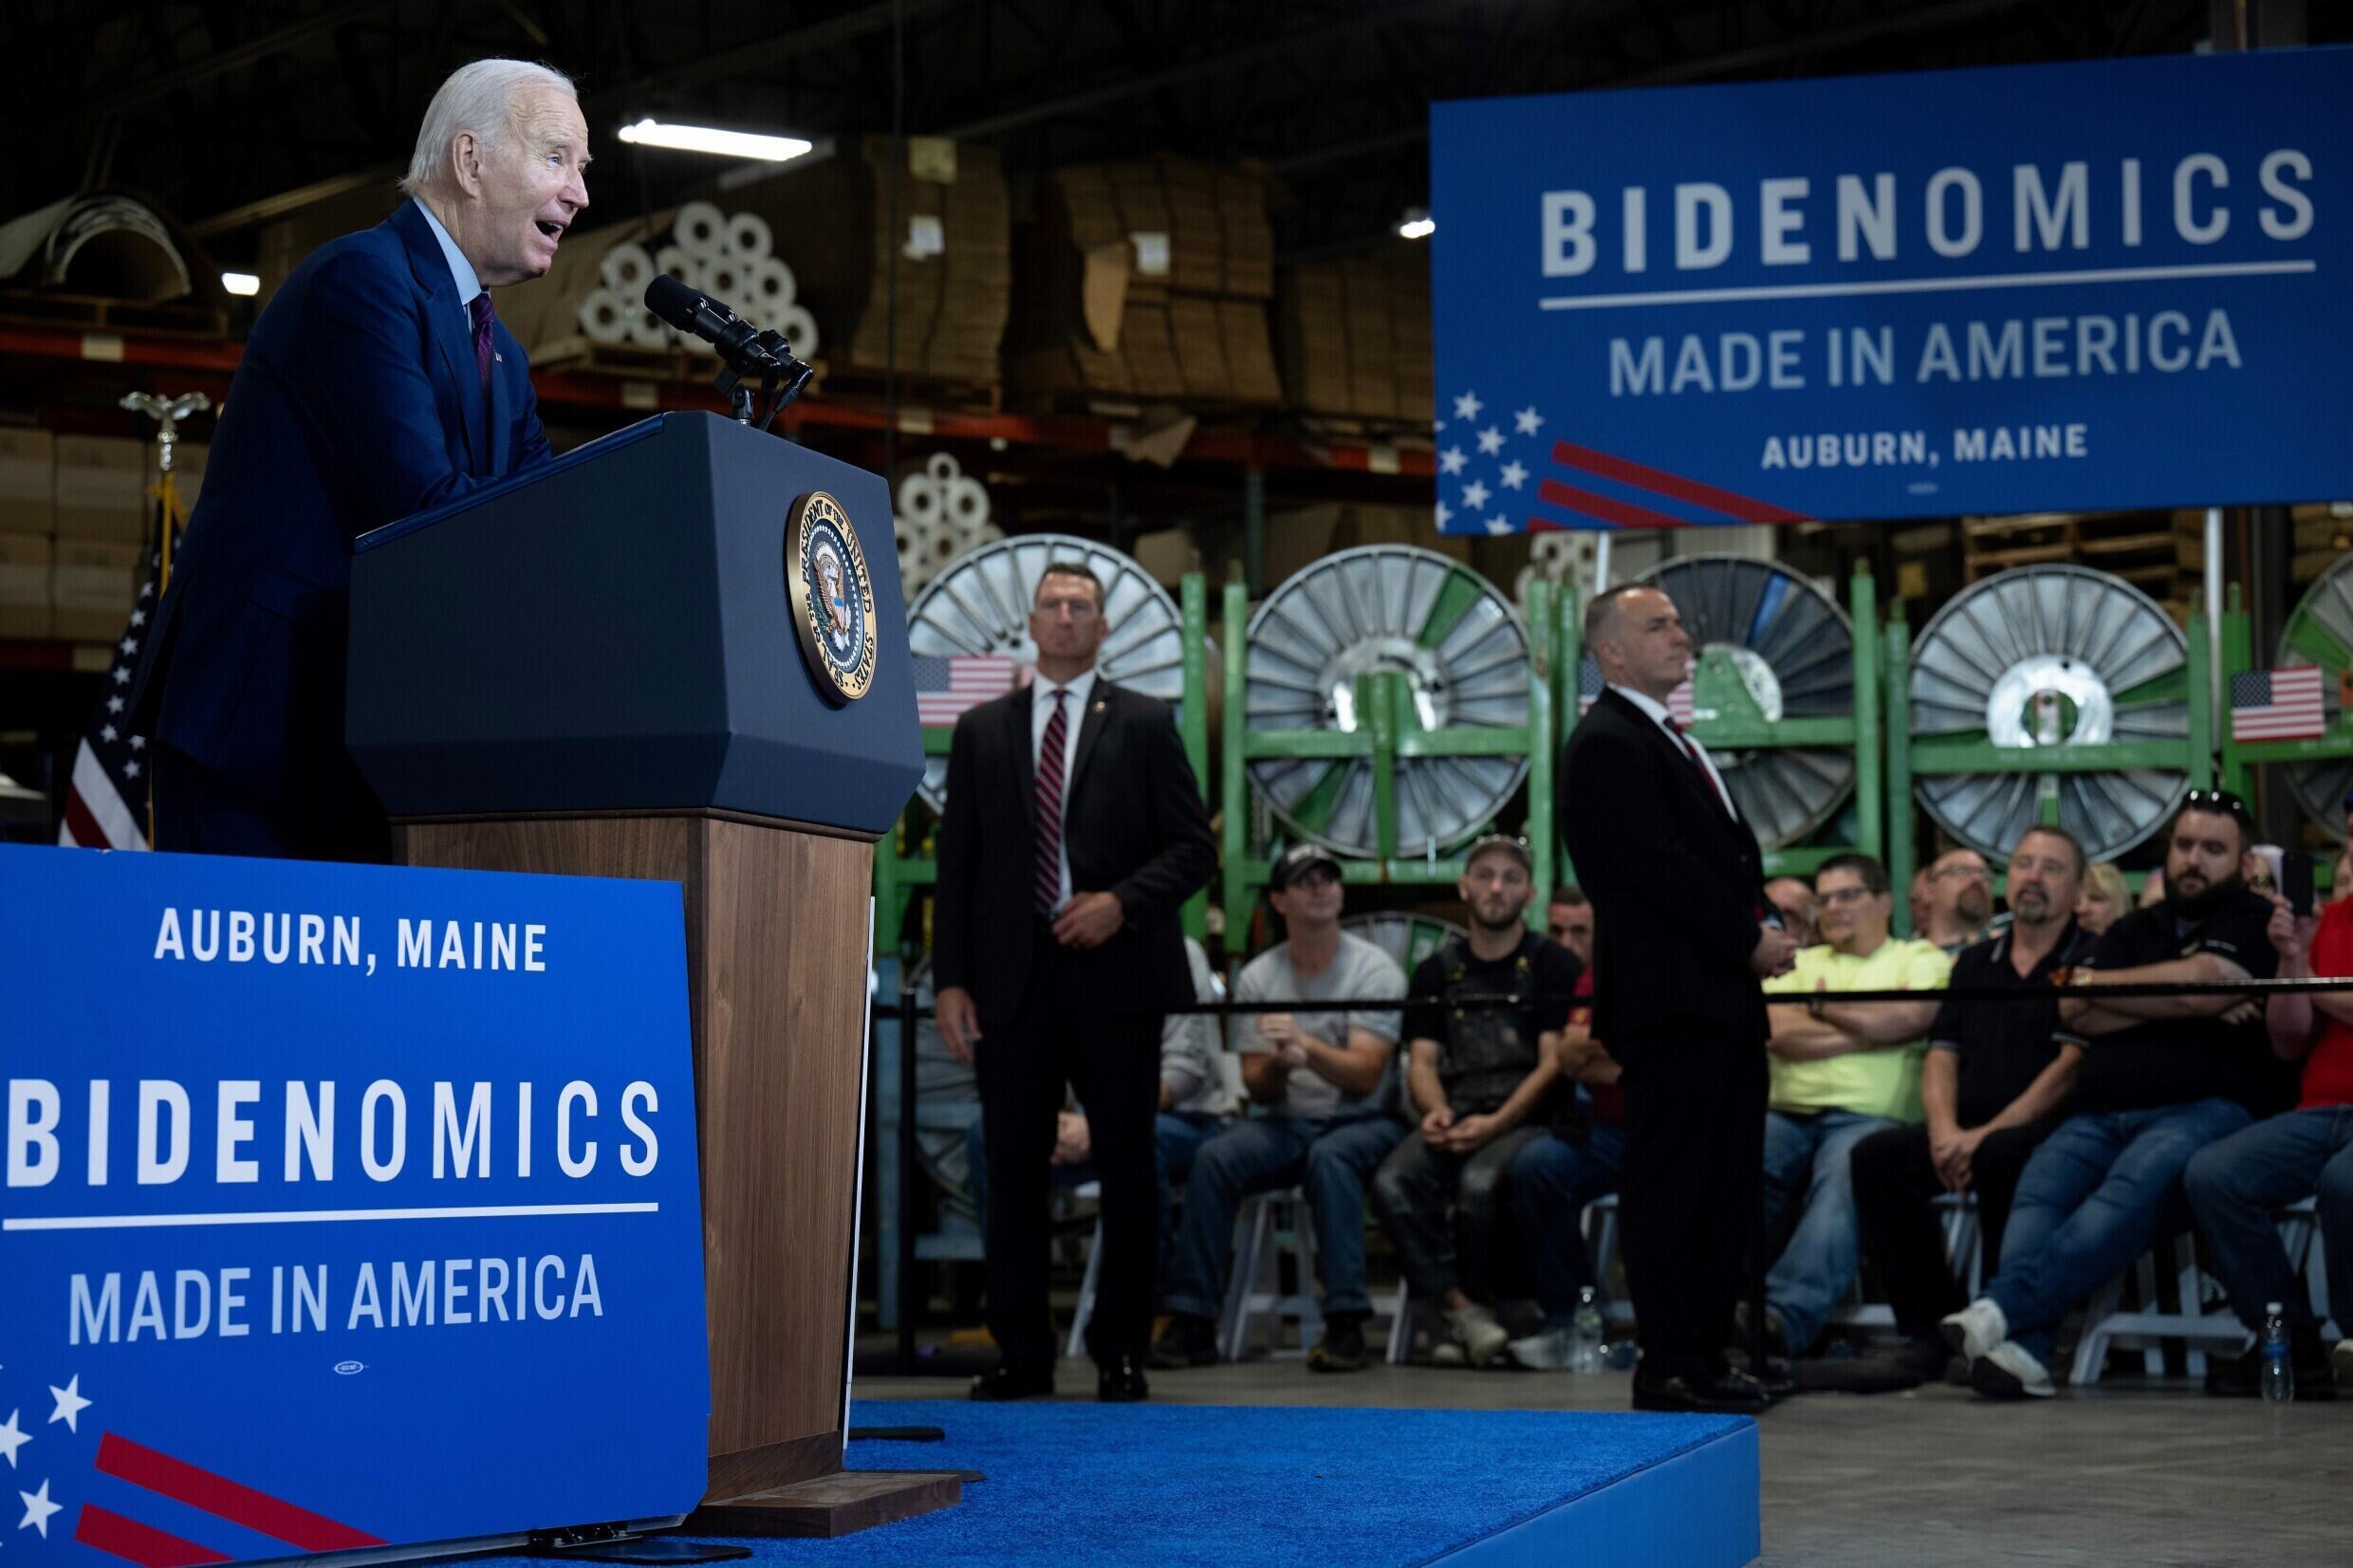 Aside from climate action and environmentalism, Joe Biden is eager to tout his economic agenda and the policies that he says are reviving America's infrastructure